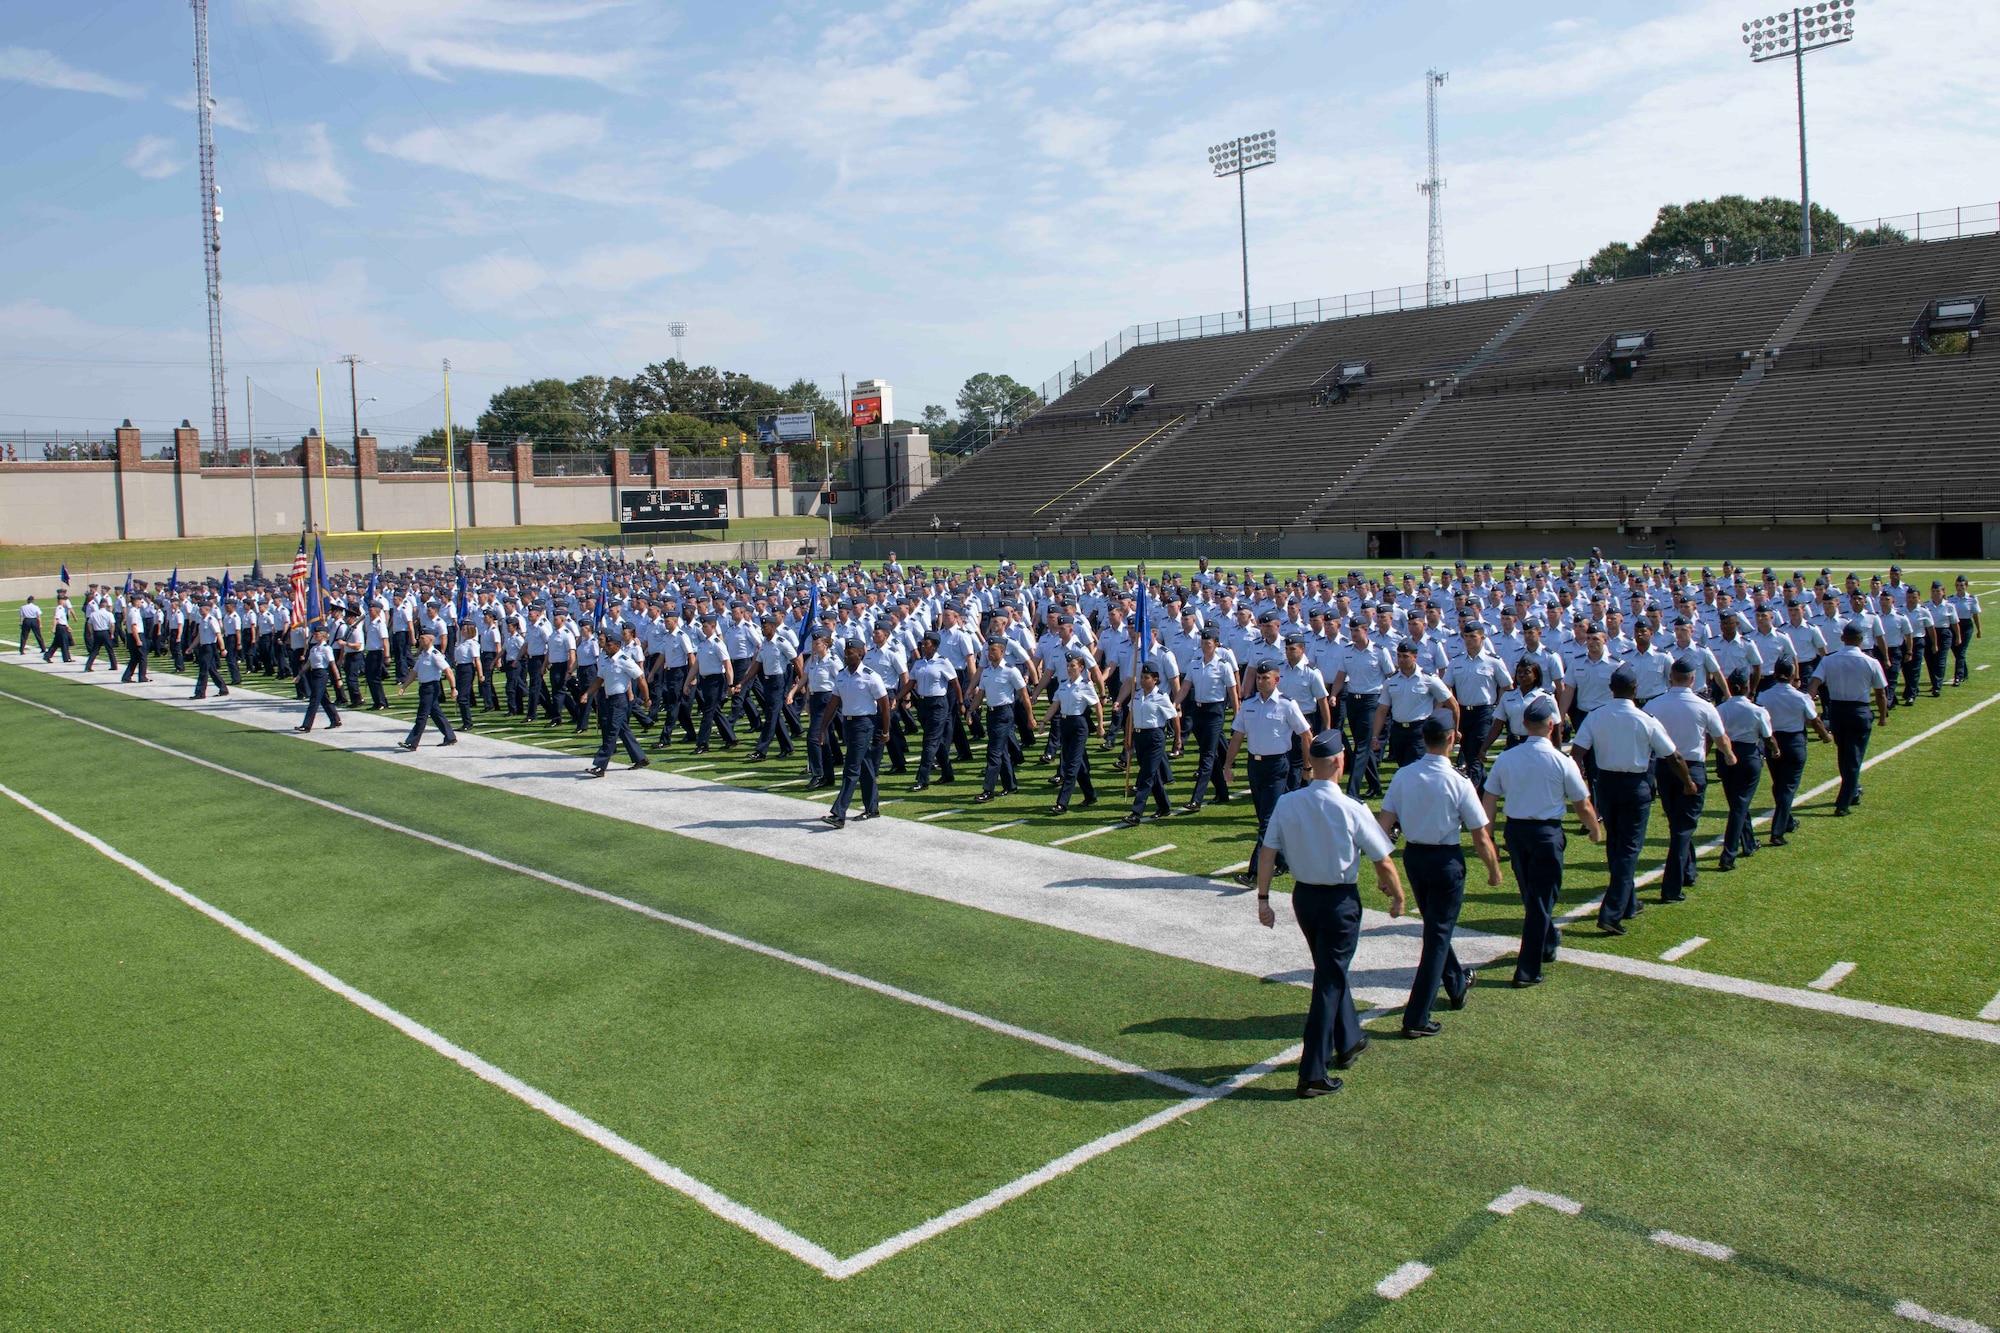 A formation of officers march into formation at a stadium.